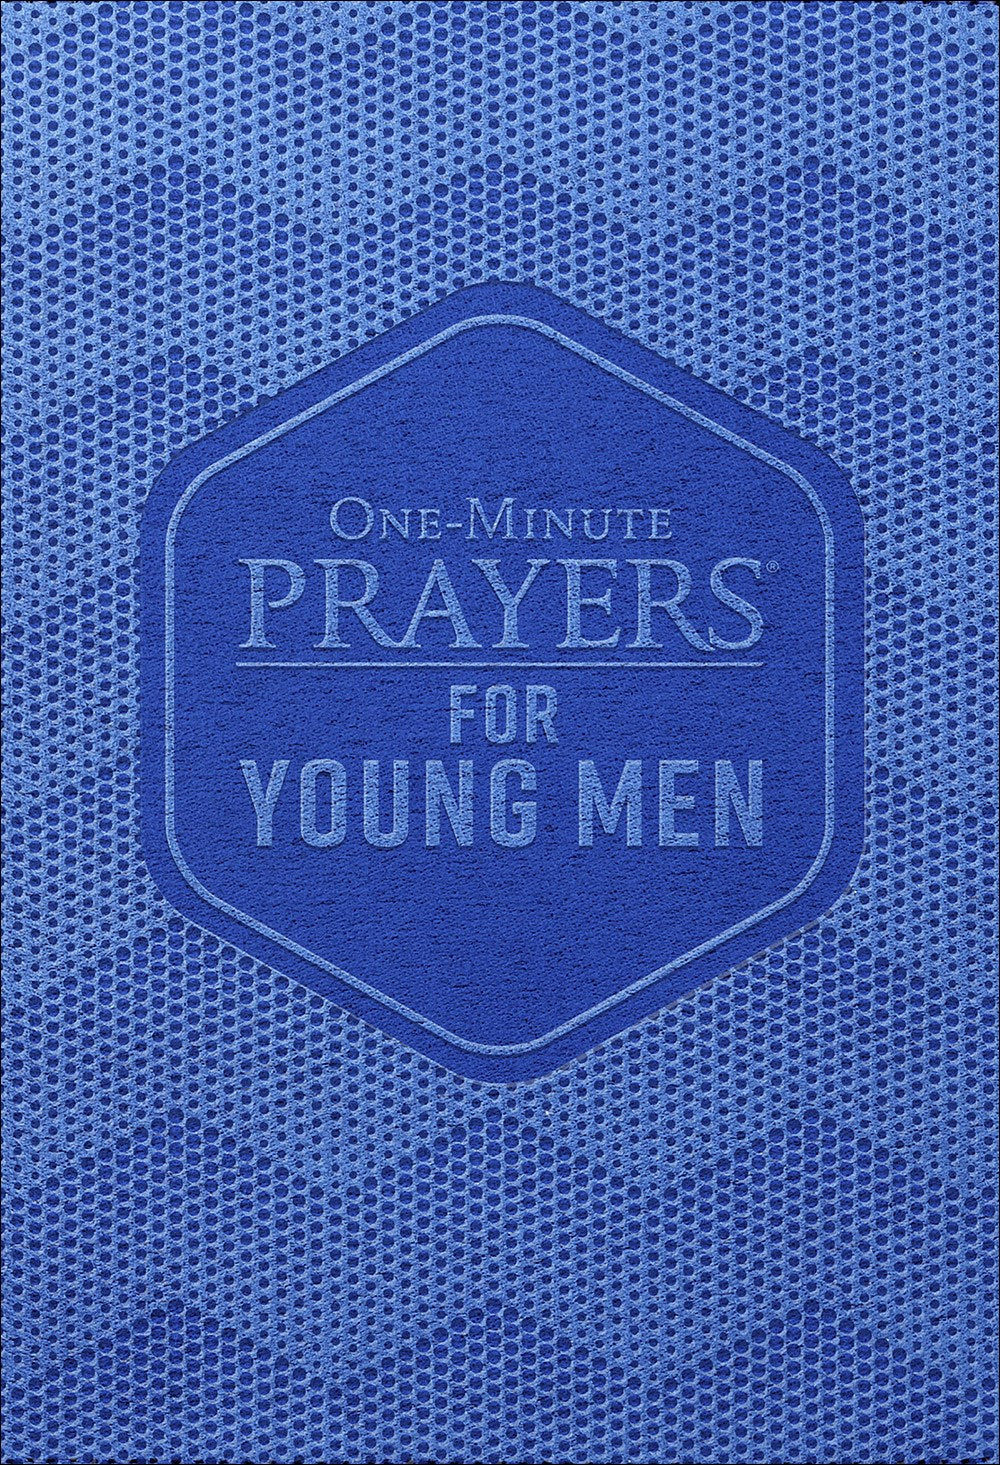 One-Minute Prayers For Young Men (Deluxe Edition)-Imitation Leather